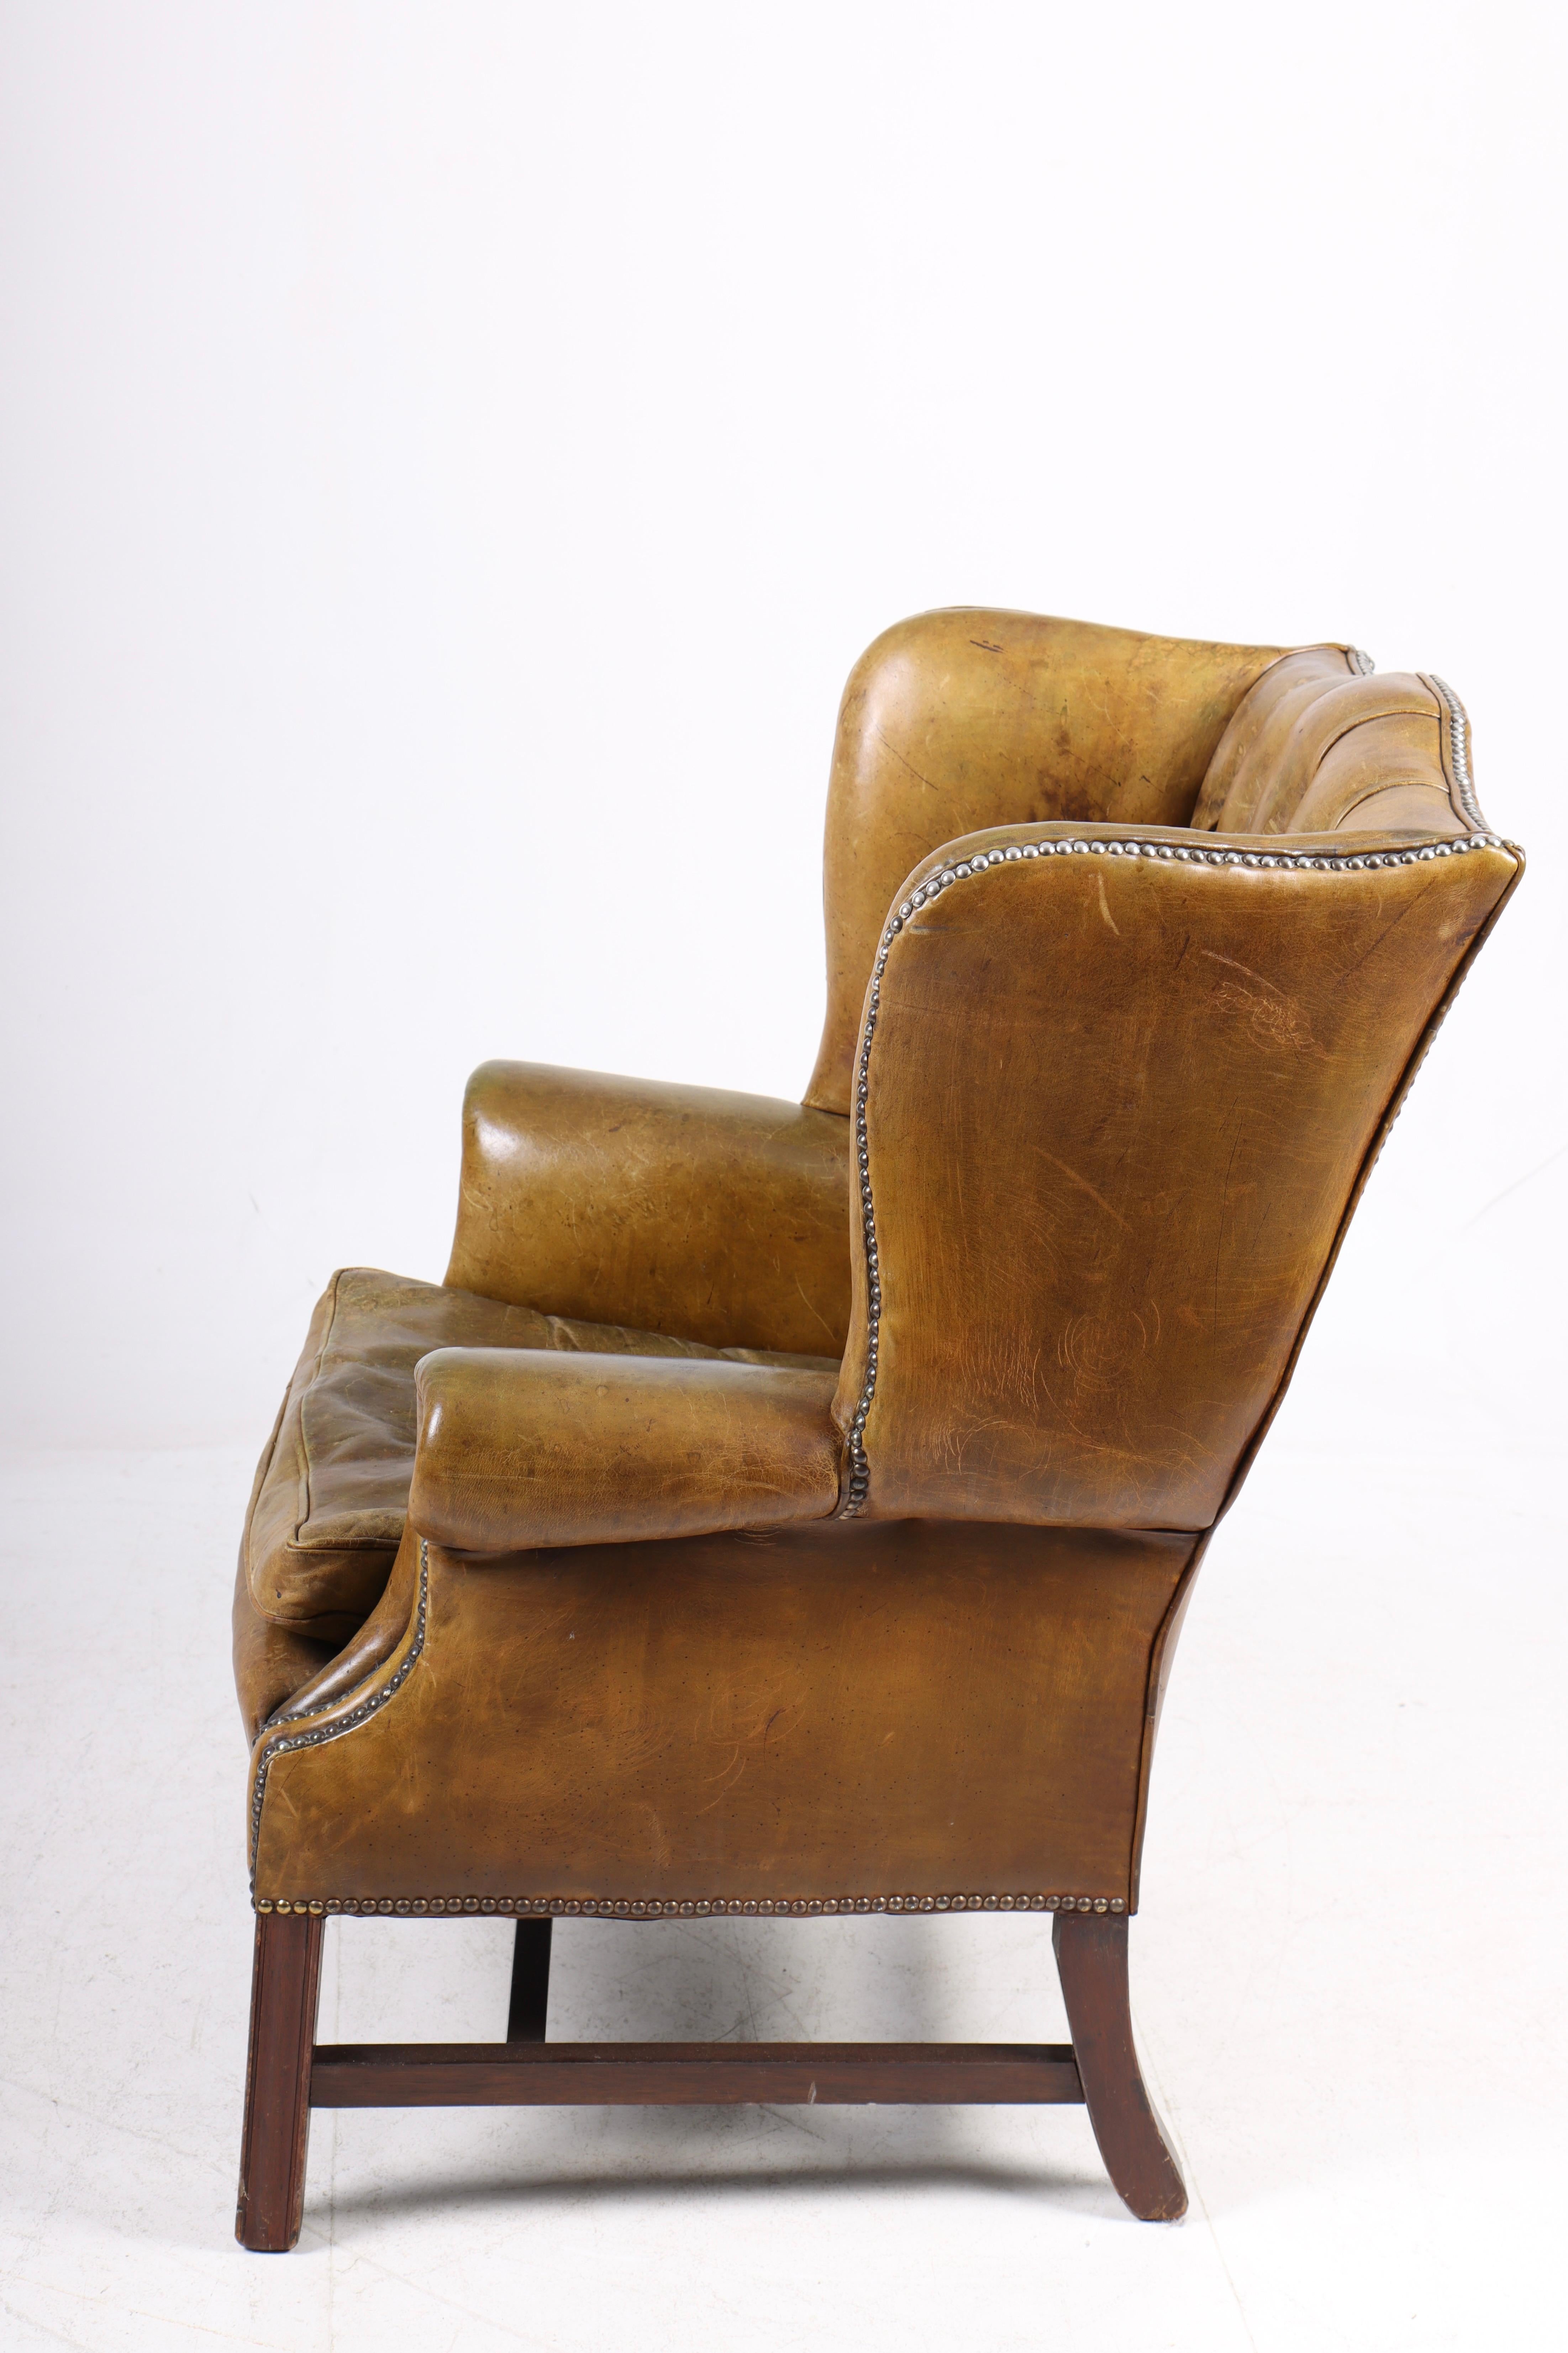 Mid-20th Century Chesterfield Wingback Chair in Leather, Made in Denmark 1950s For Sale